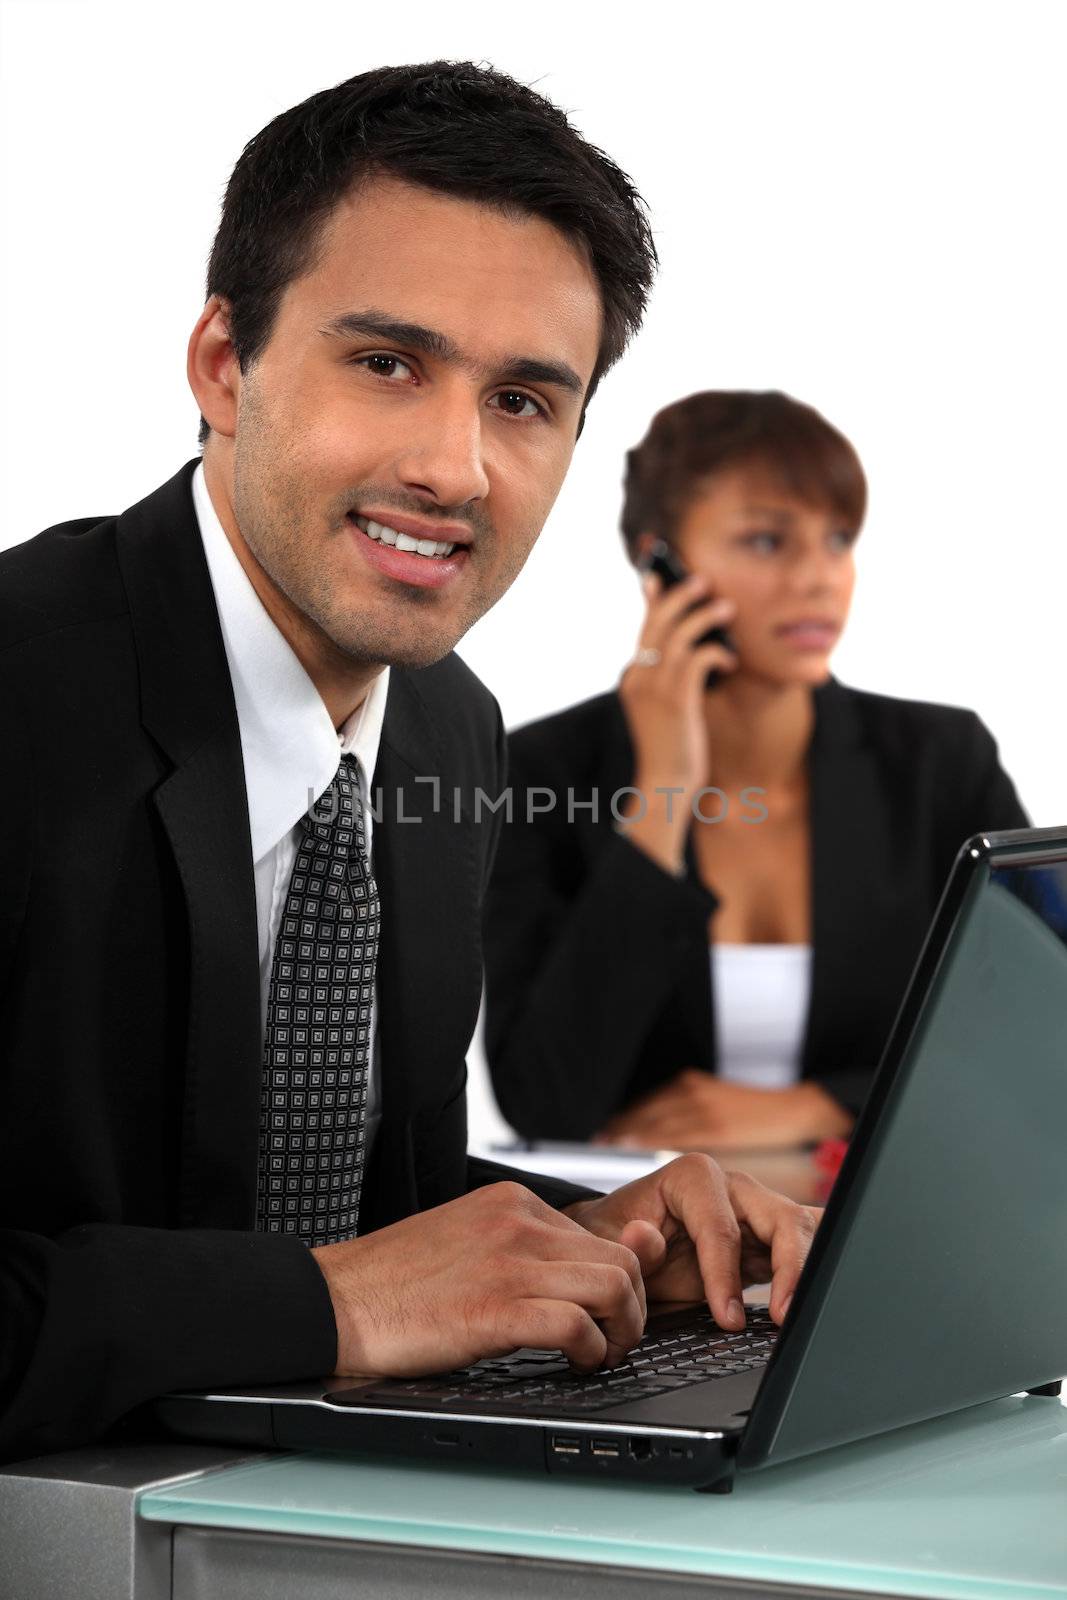 Smiling businessman with a laptop